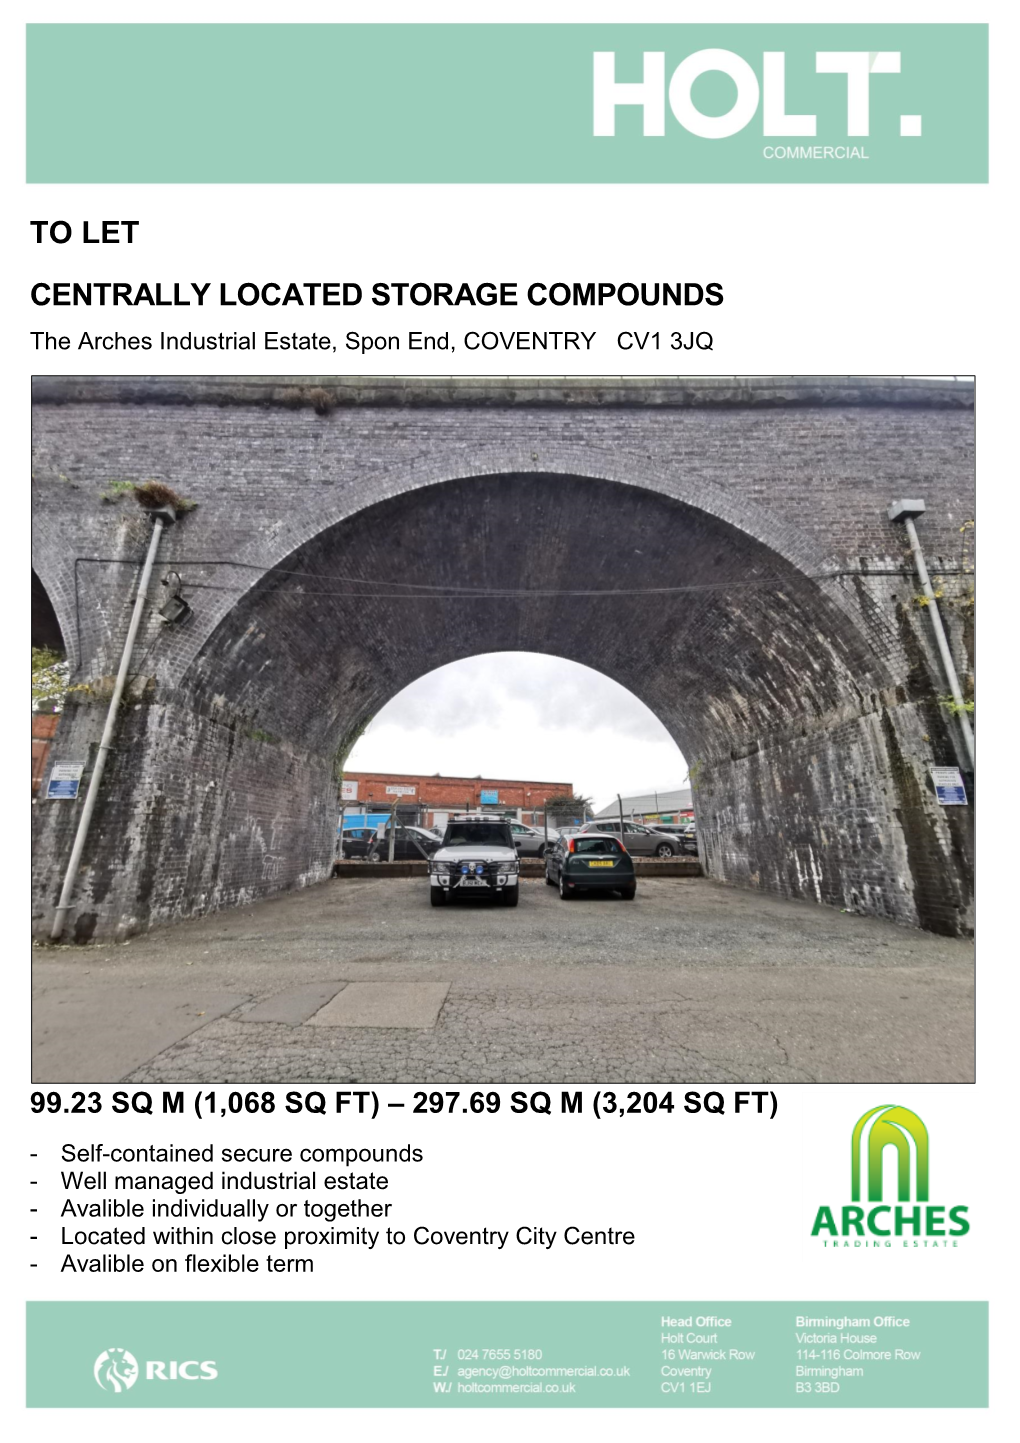 To Let Centrally Located Storage Compounds